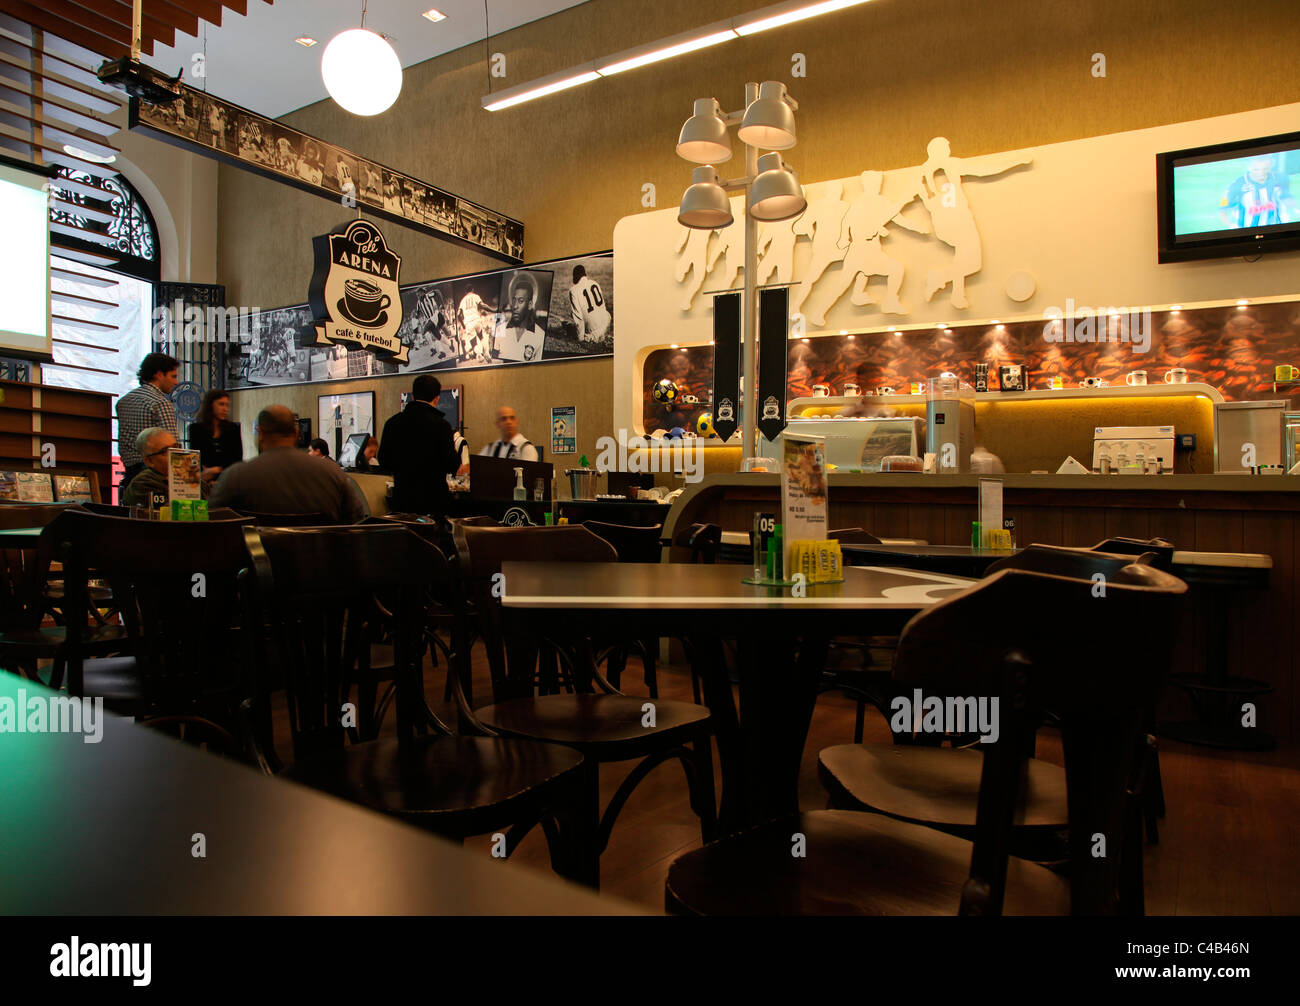 "Pele Arena - cafe & futebol" is a cafe in donwtown Sao Paulo. Brazil Stock Photo